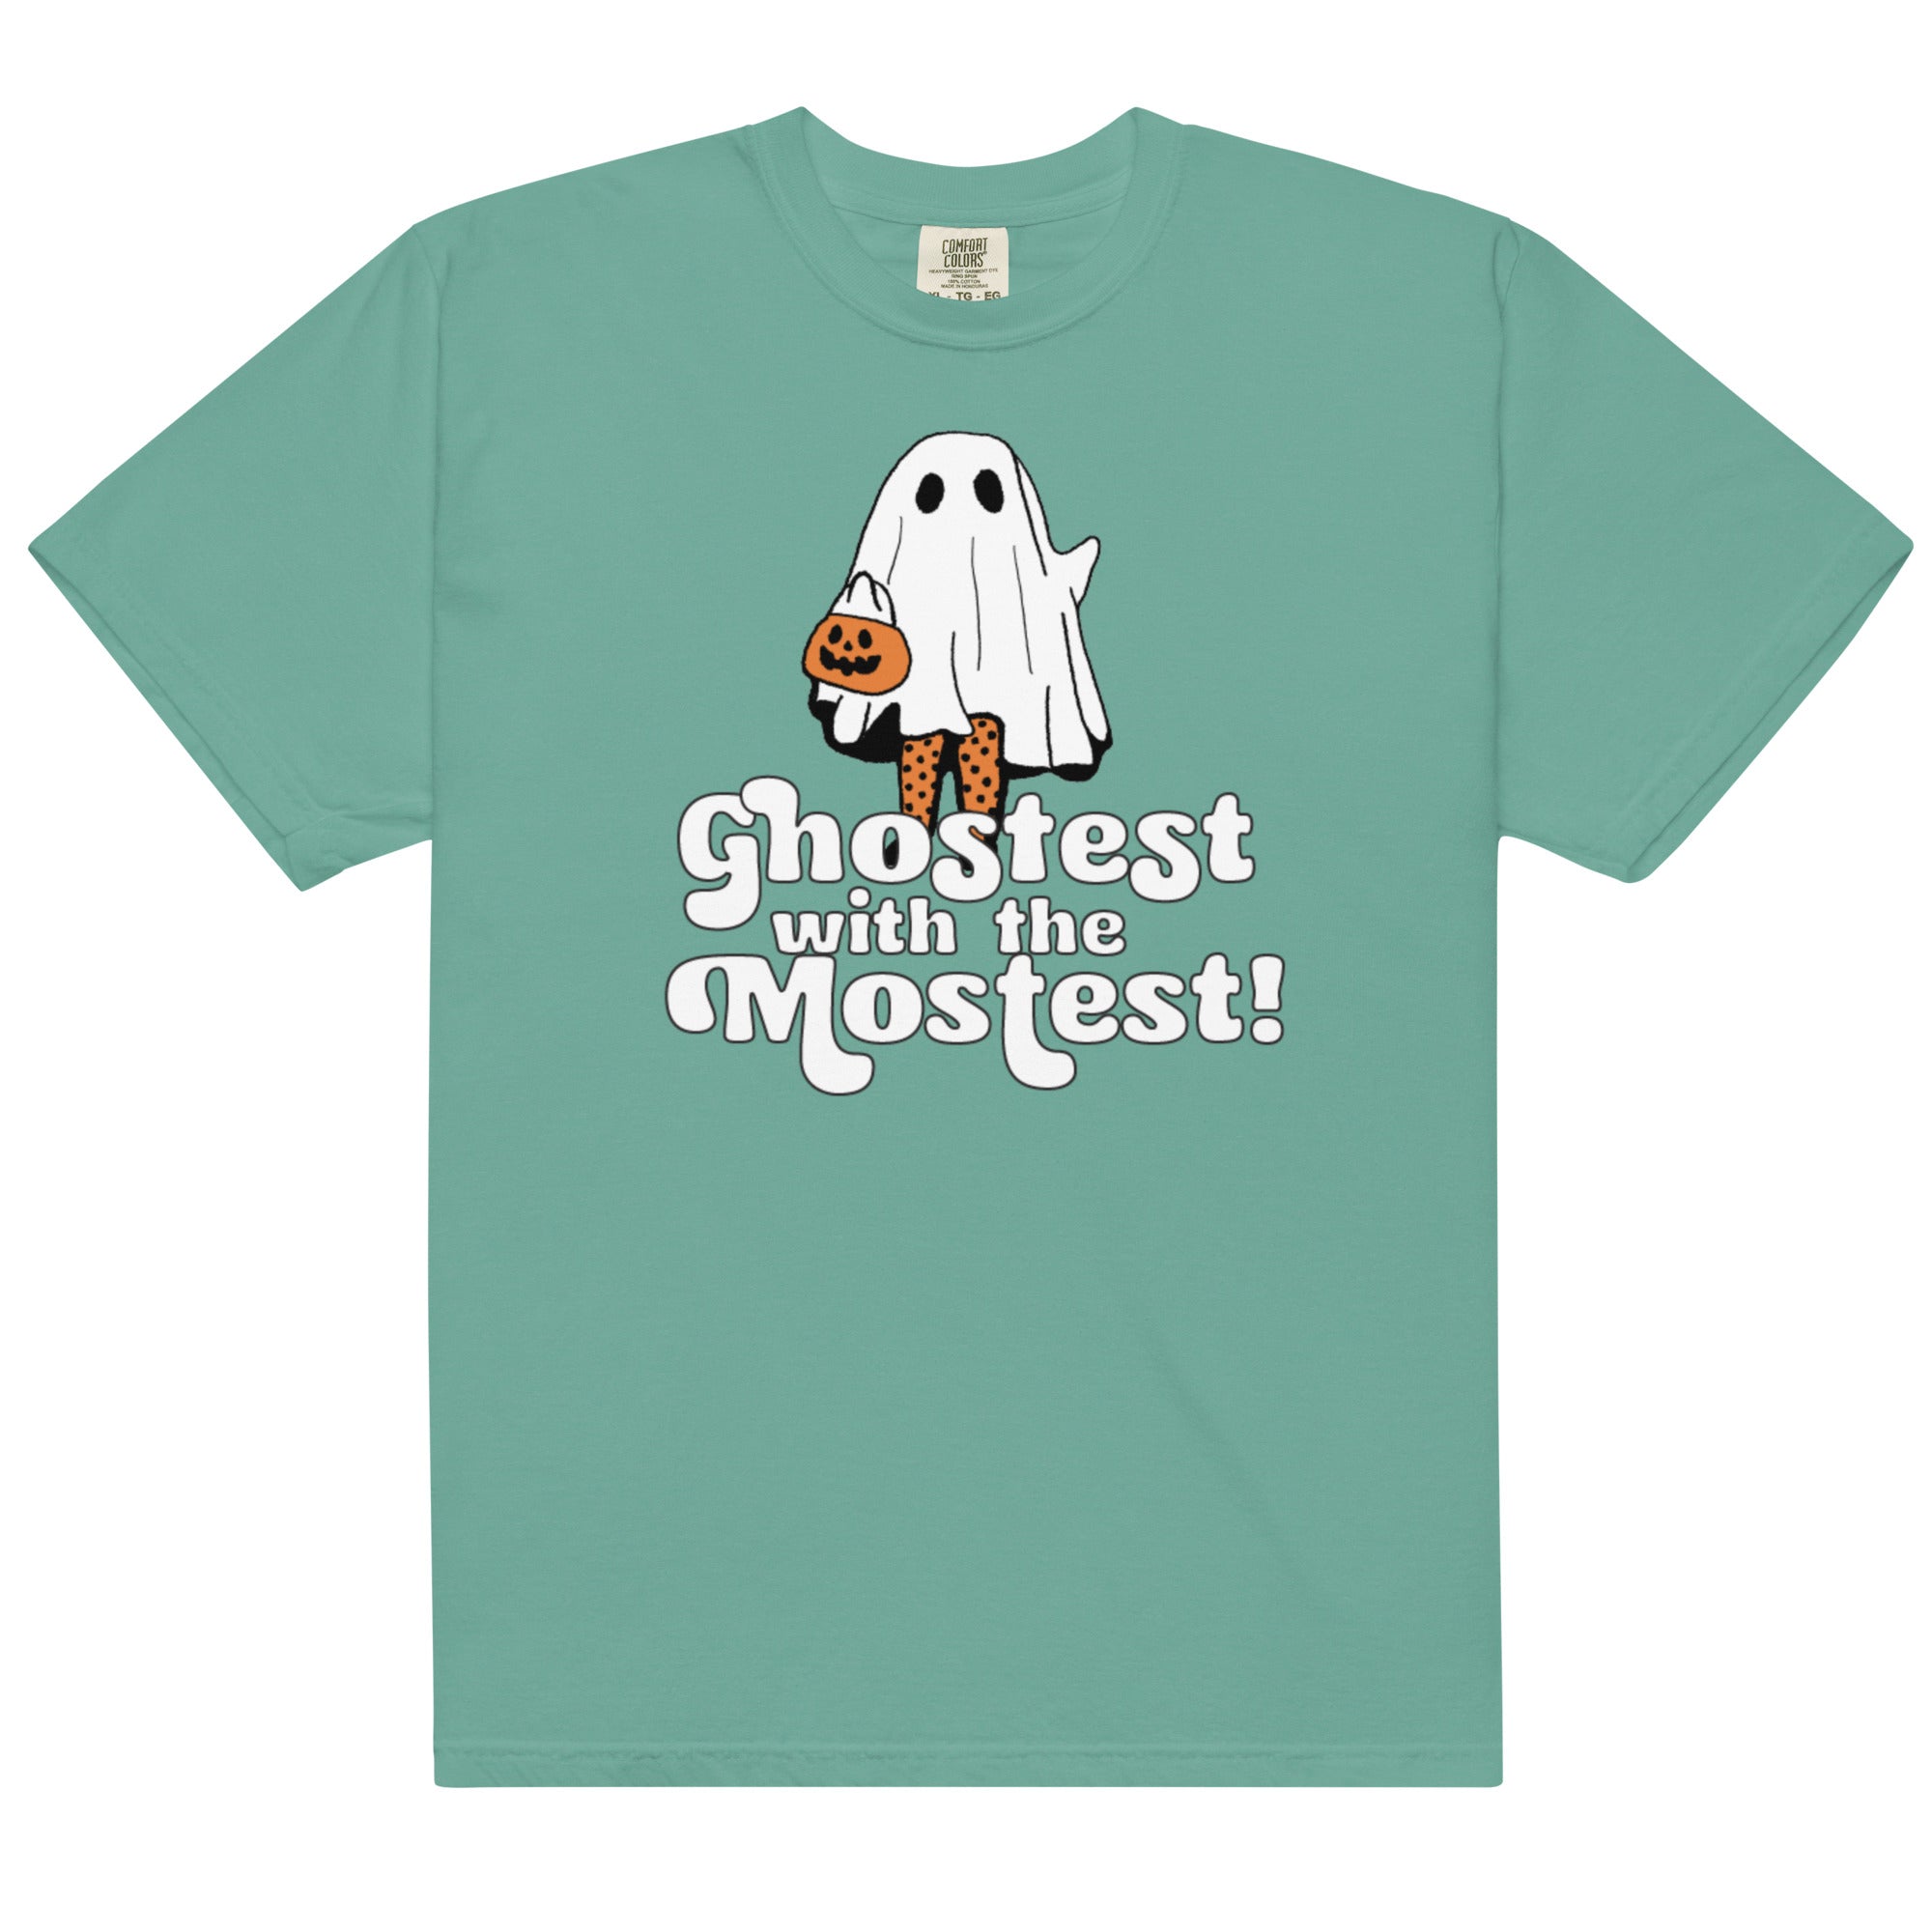 Ghostest with the Mostest Tee